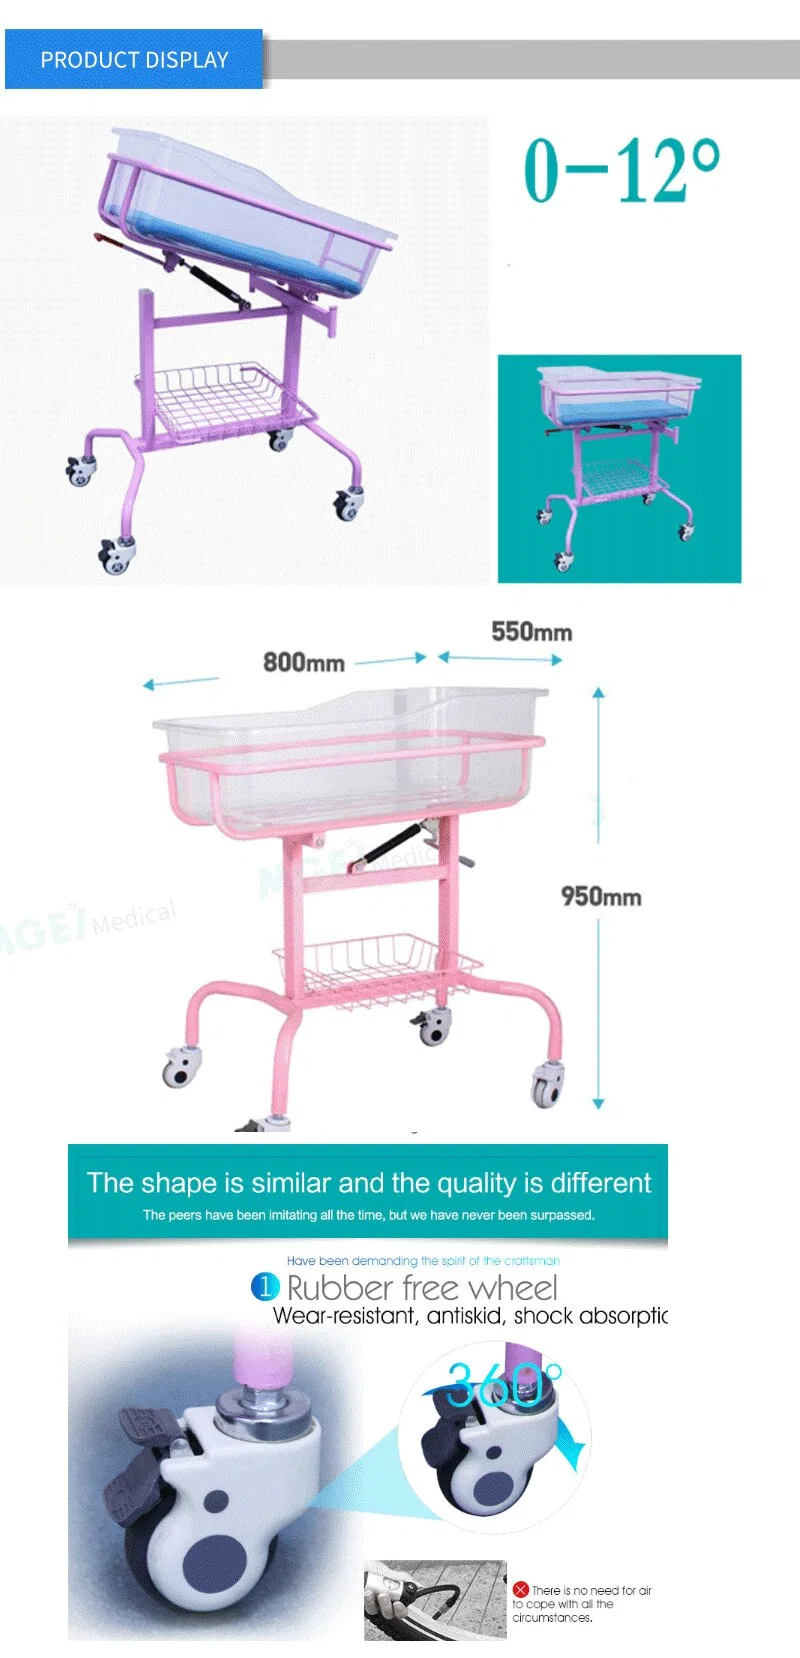 Hospital ABS New Baby Infant Bed Cart Baby Care Crib